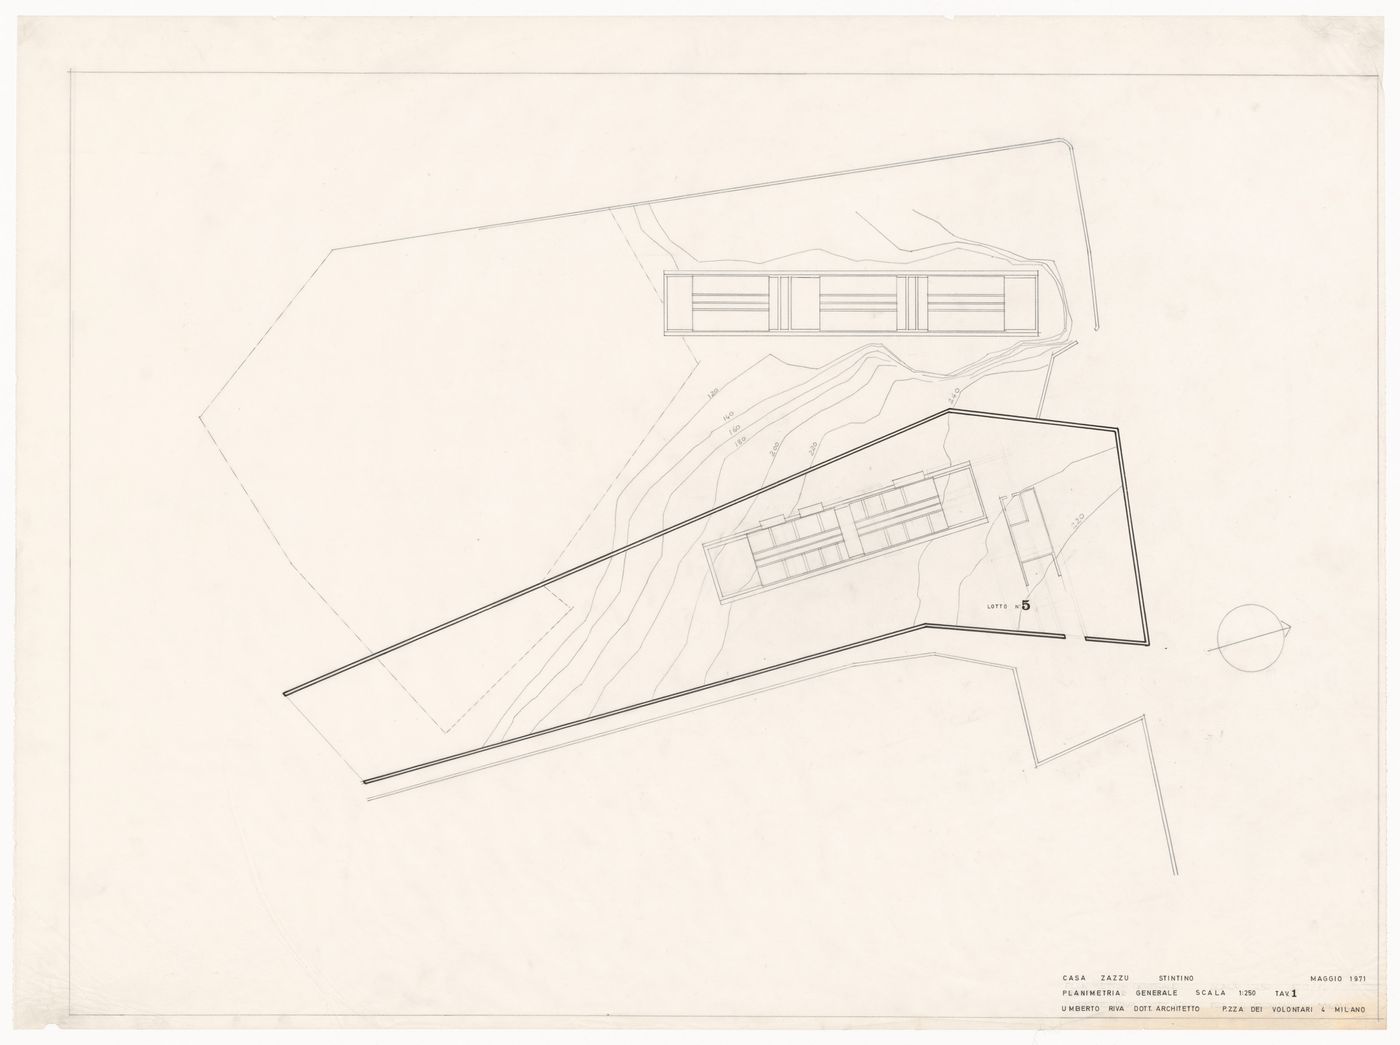 Site and floor plans for Case Zazzu, Stintino, Italy